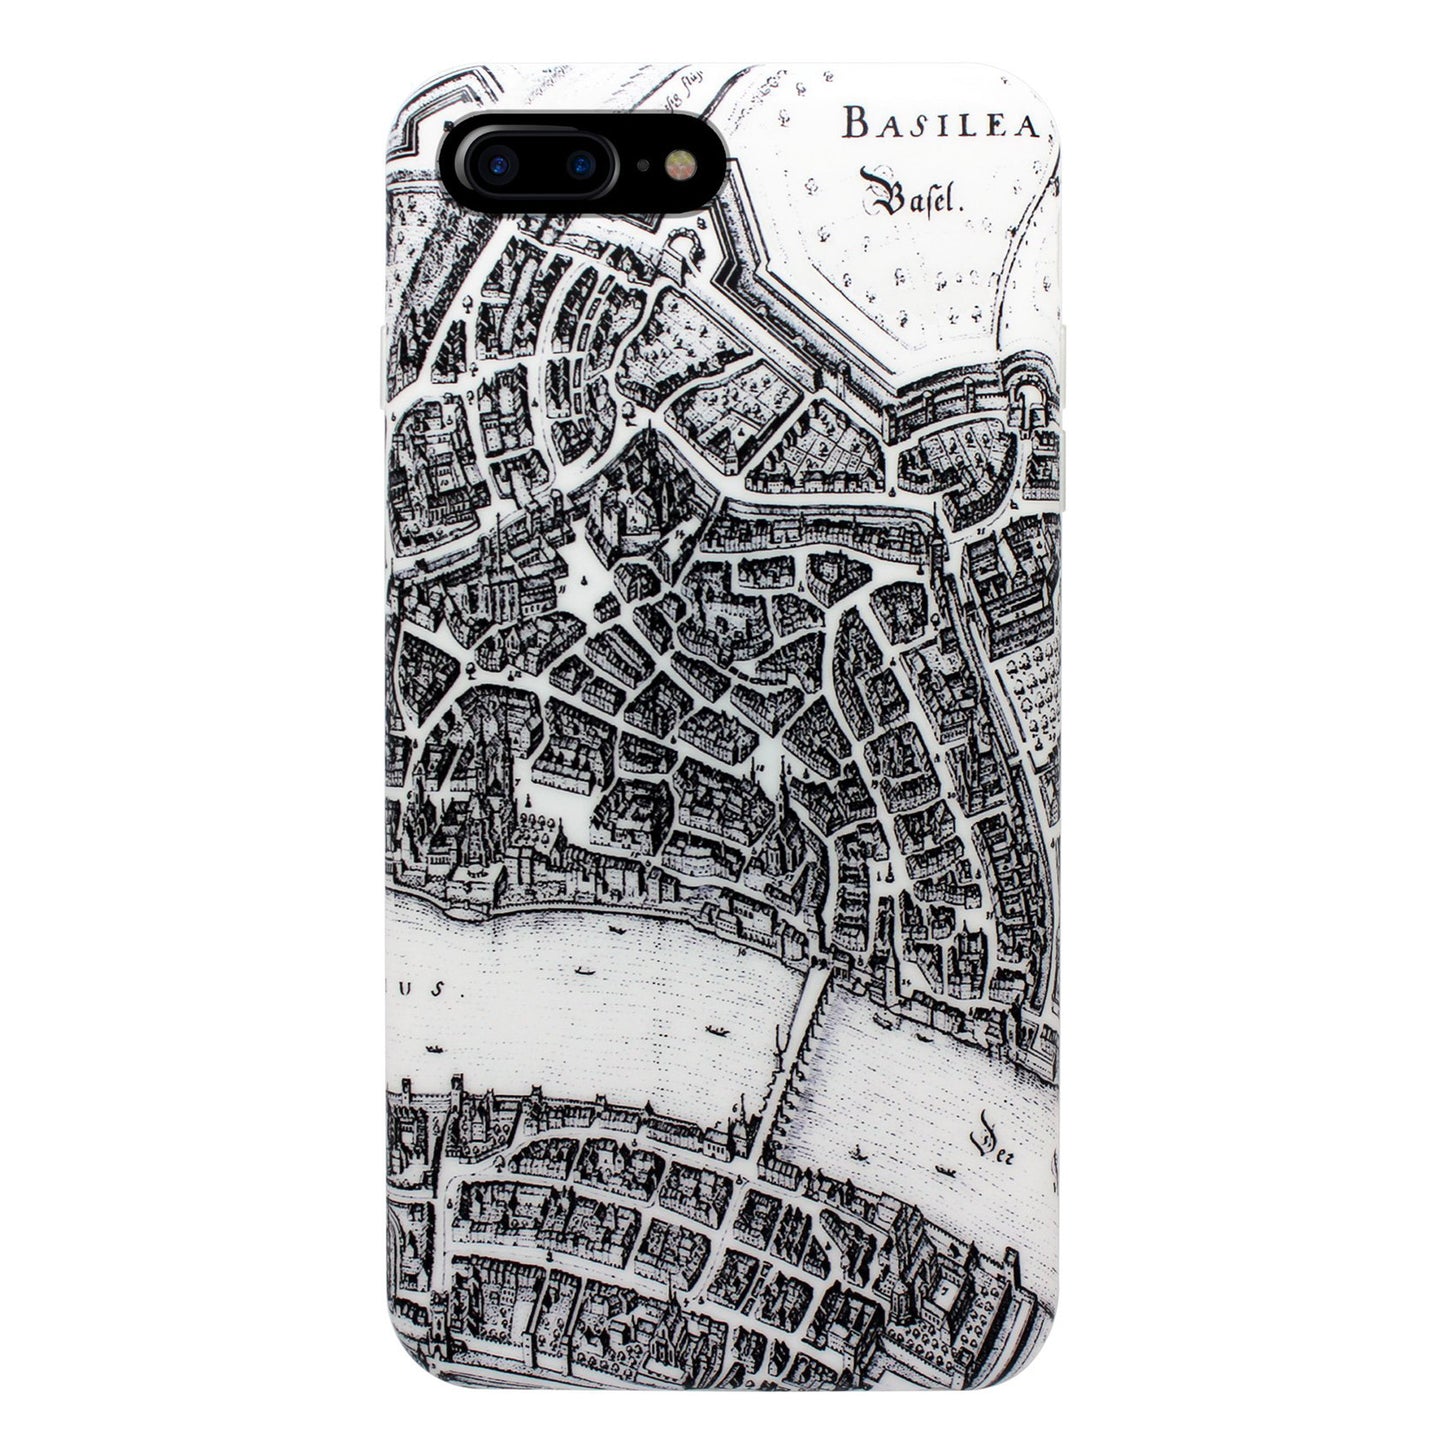 Basel Merian 360° Case for iPhone 6/6S/7/8 Plus